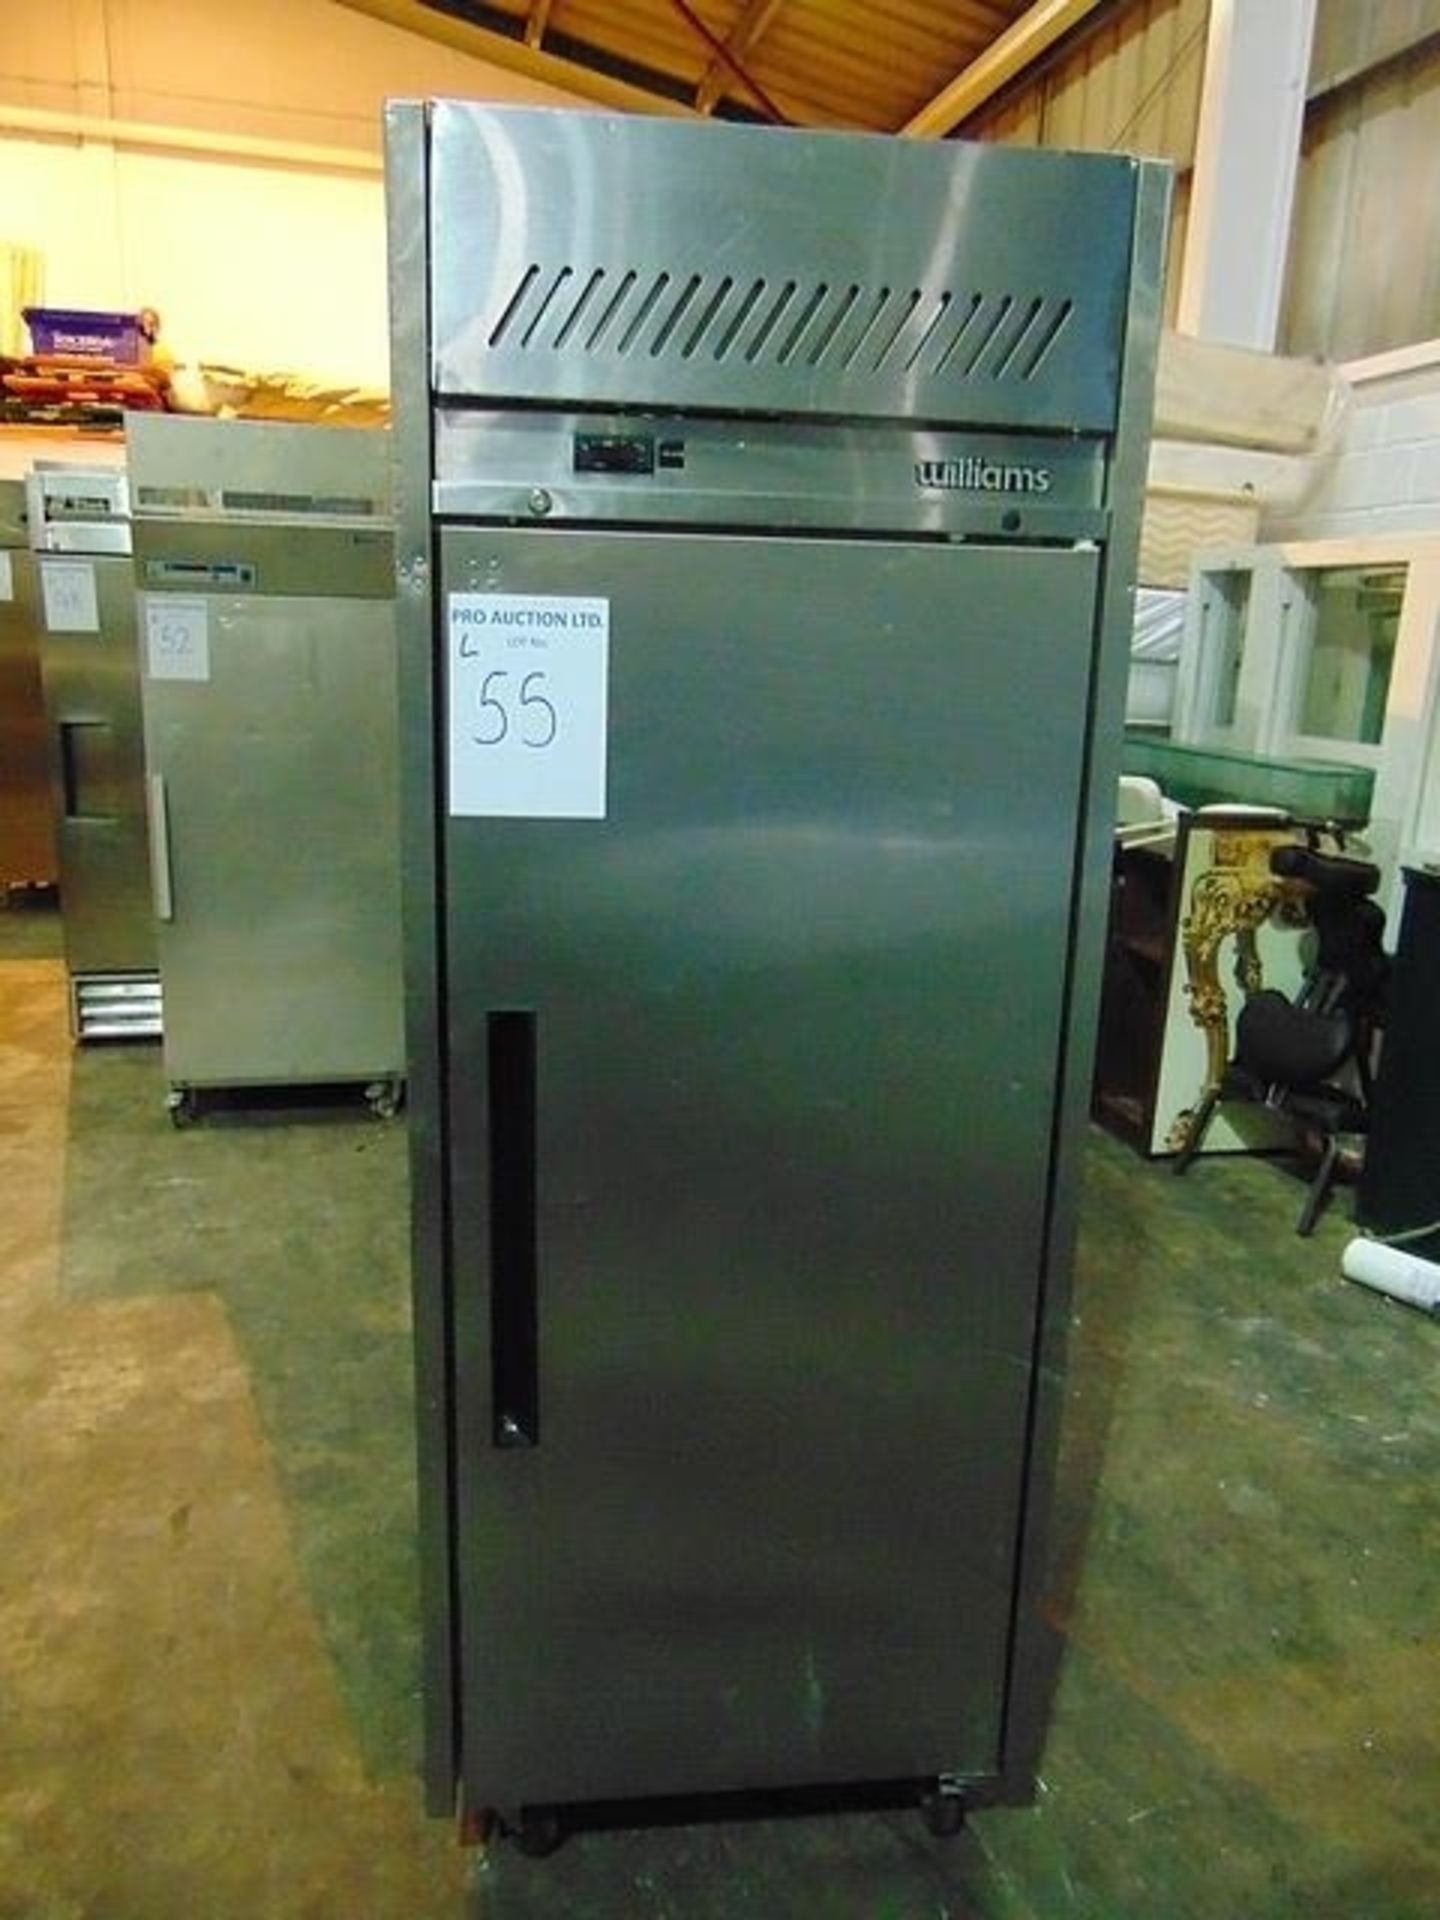 Williams LJ1SA stainless steel commercial upright freezer capacity 620 litres / 21.9 cuft